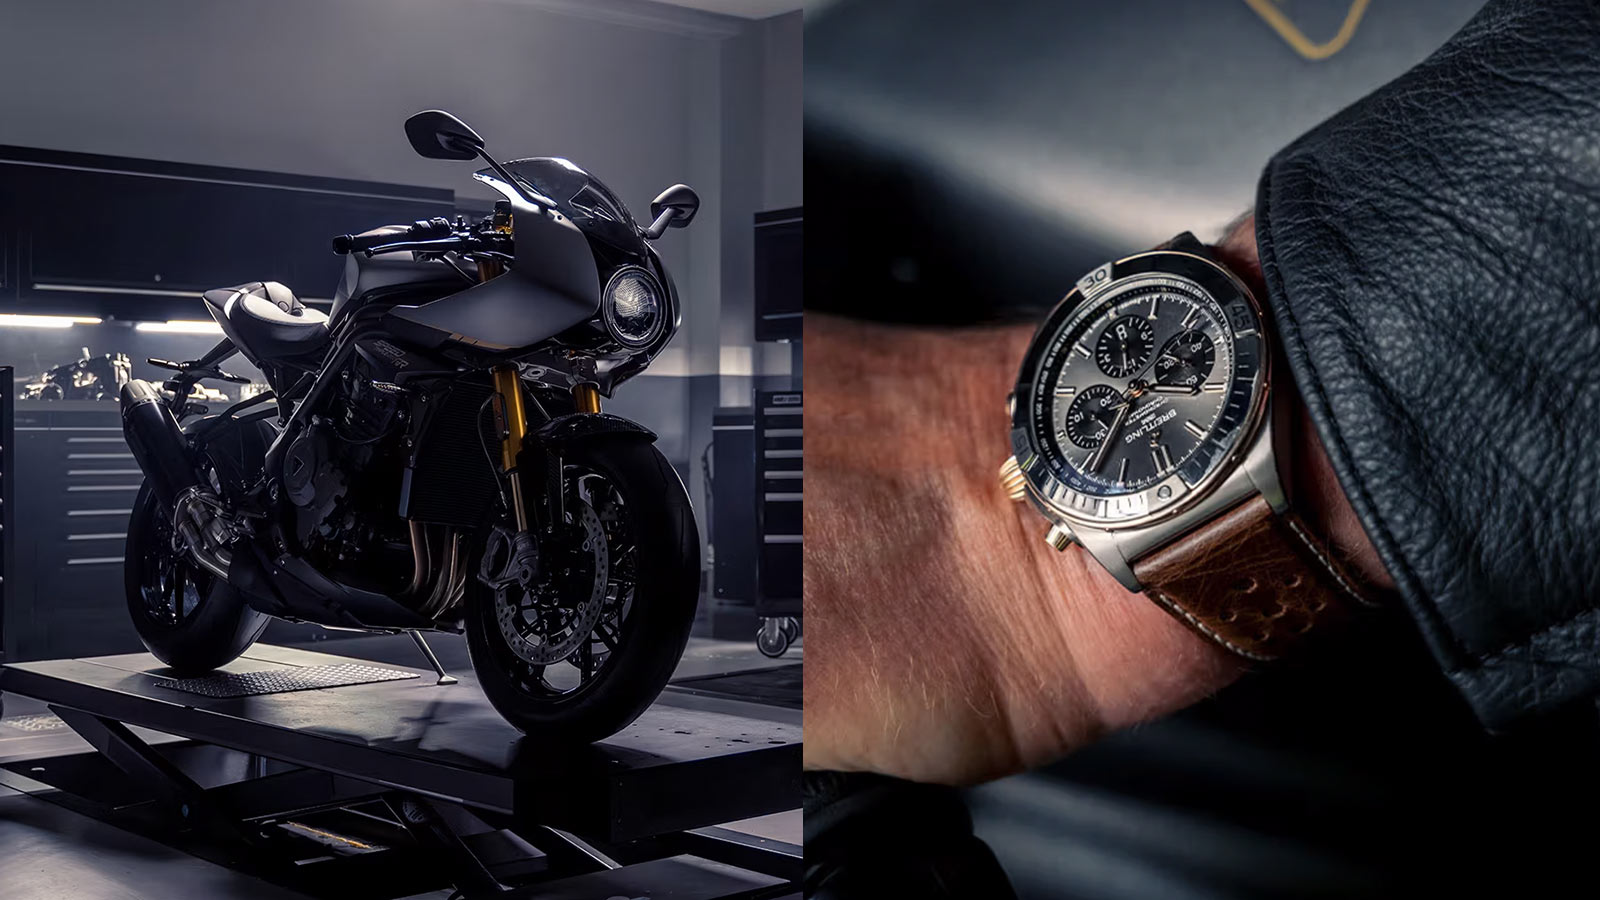 Triumph Speed Triple 1200 RR Breitling Limited Edition Motorcycle and Breitling Chronomat B01 Triumph Watch